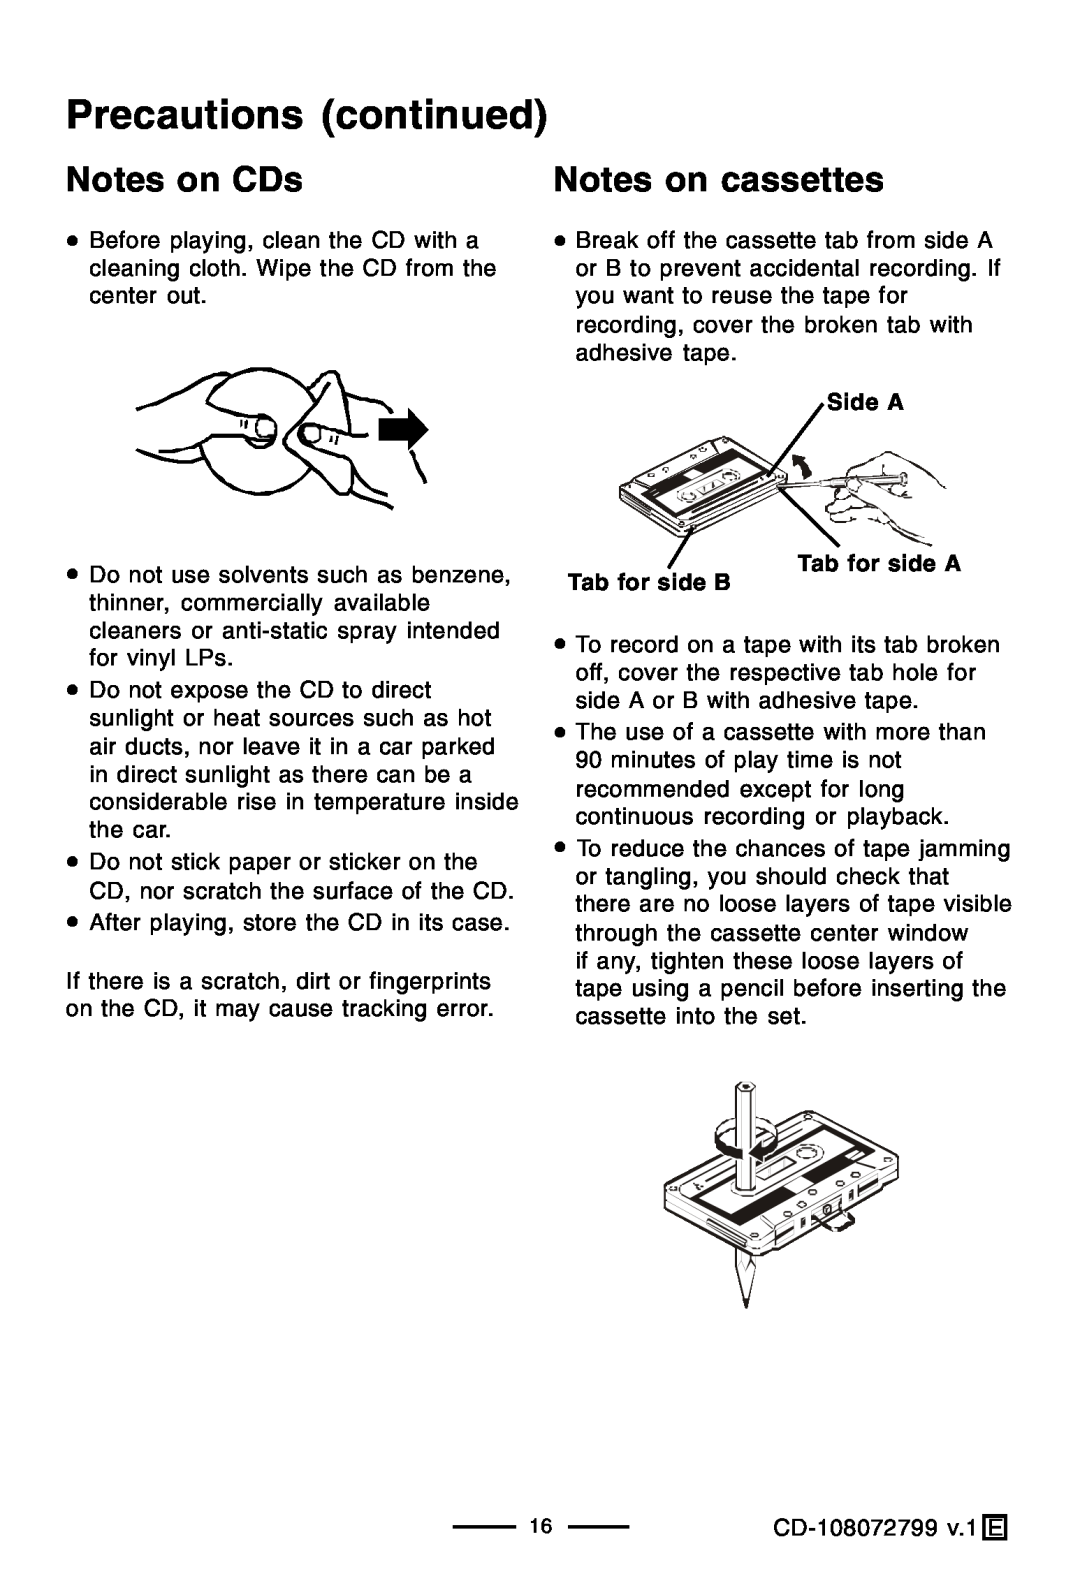 Lenoxx Electronics CD-108 operating instructions Precautions continued, Notes on CDs, Notes on cassettes 